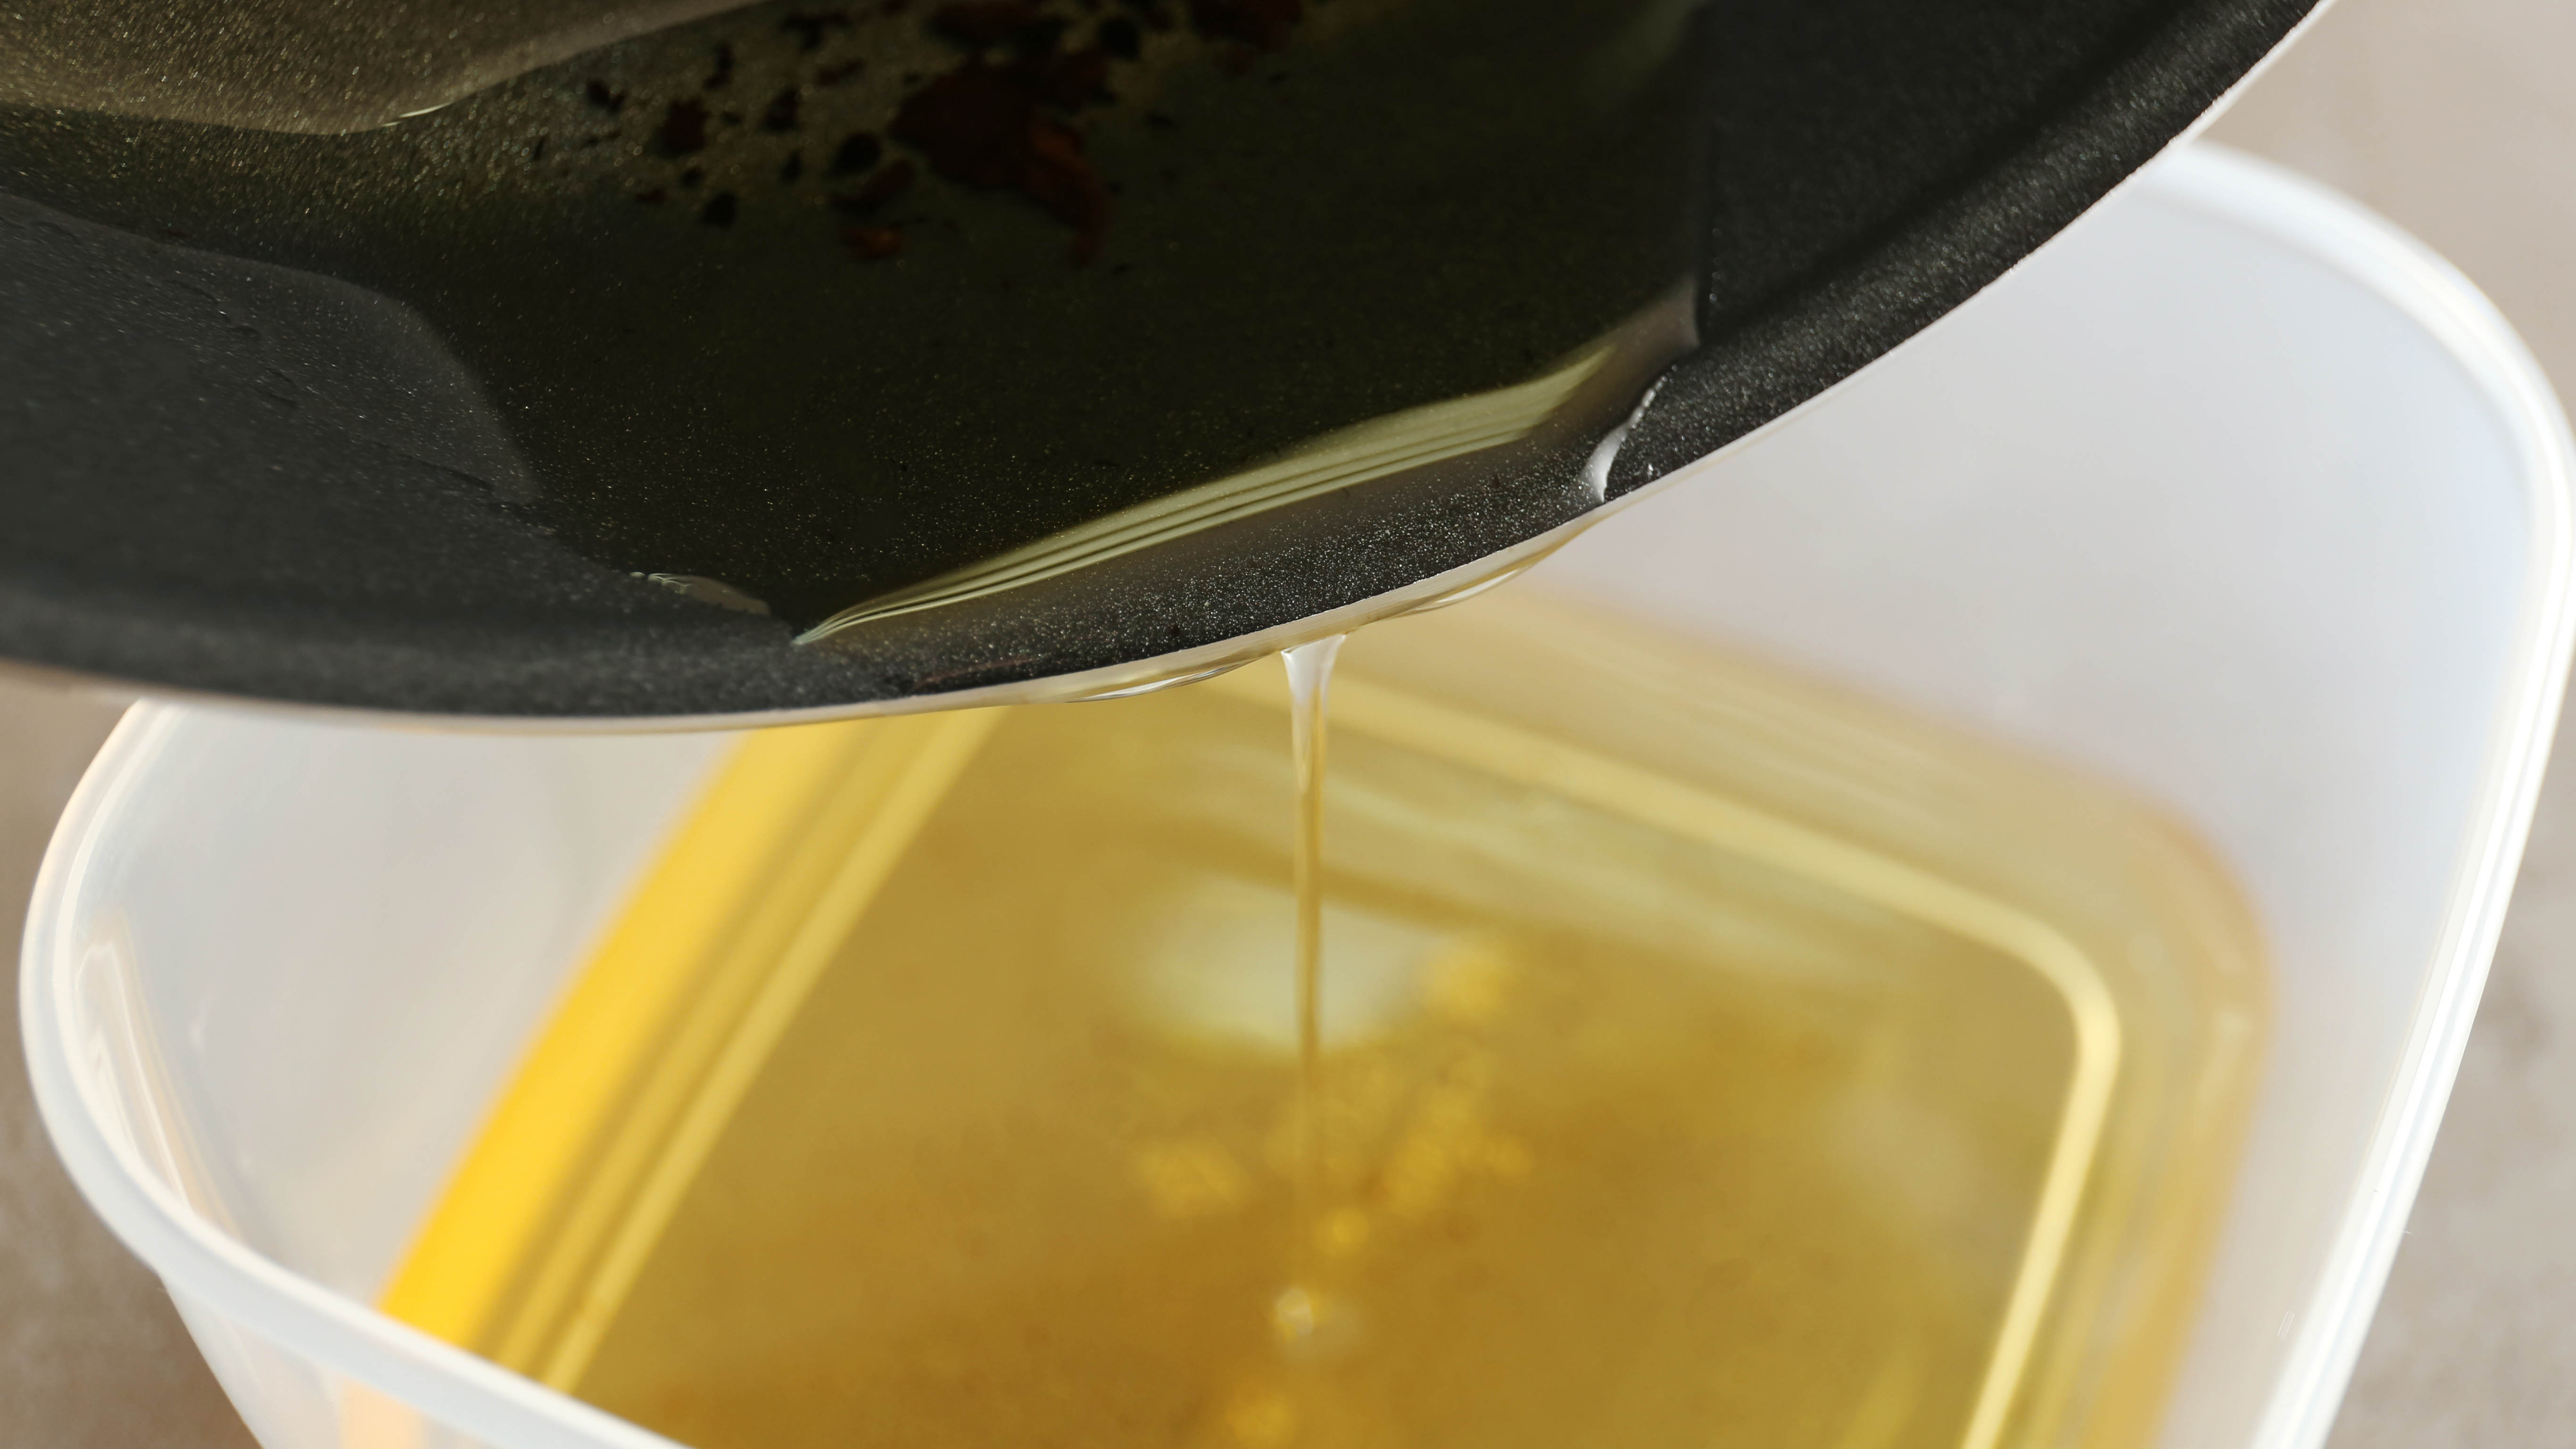 Pour oil into a container